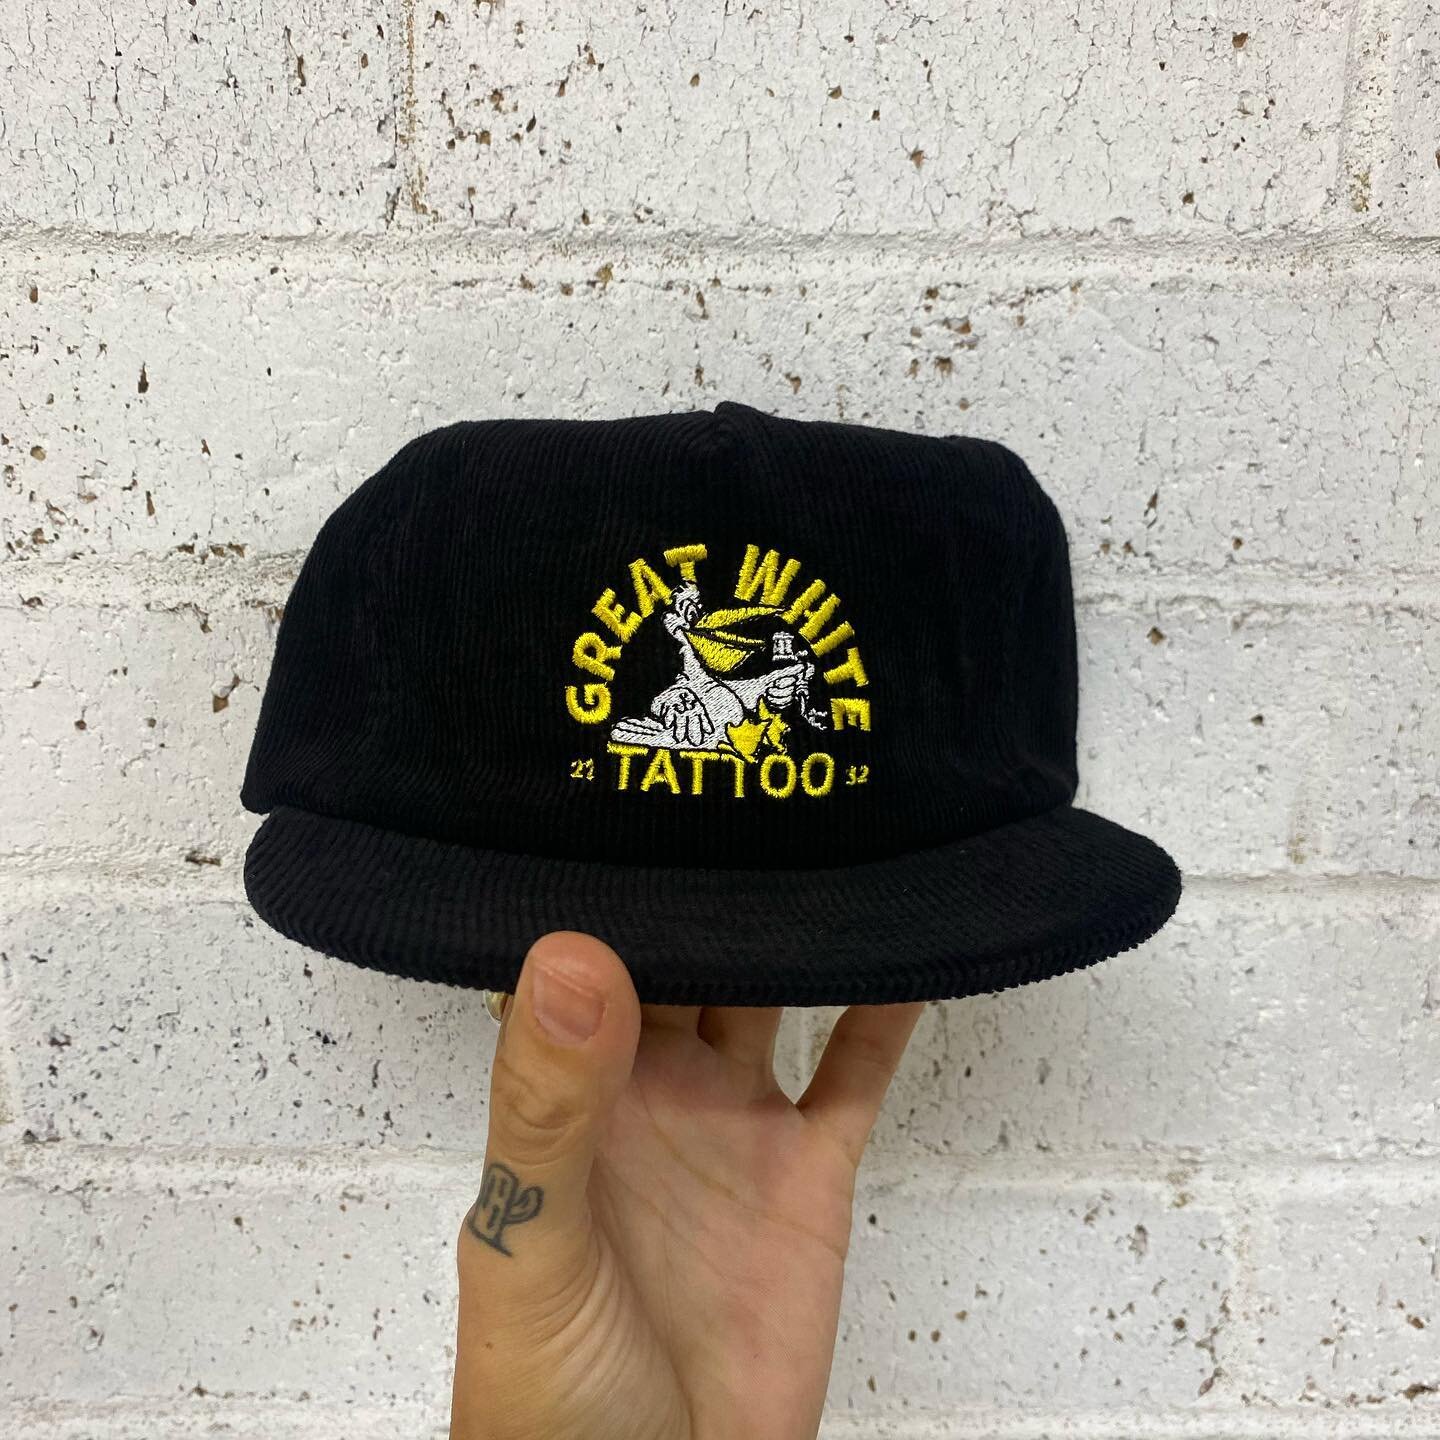 We produce some pretty rad merch for folks.
Love this one we did for @great_white_tattoo 
Art by @goodlcky 
Hats @weekdaygoods